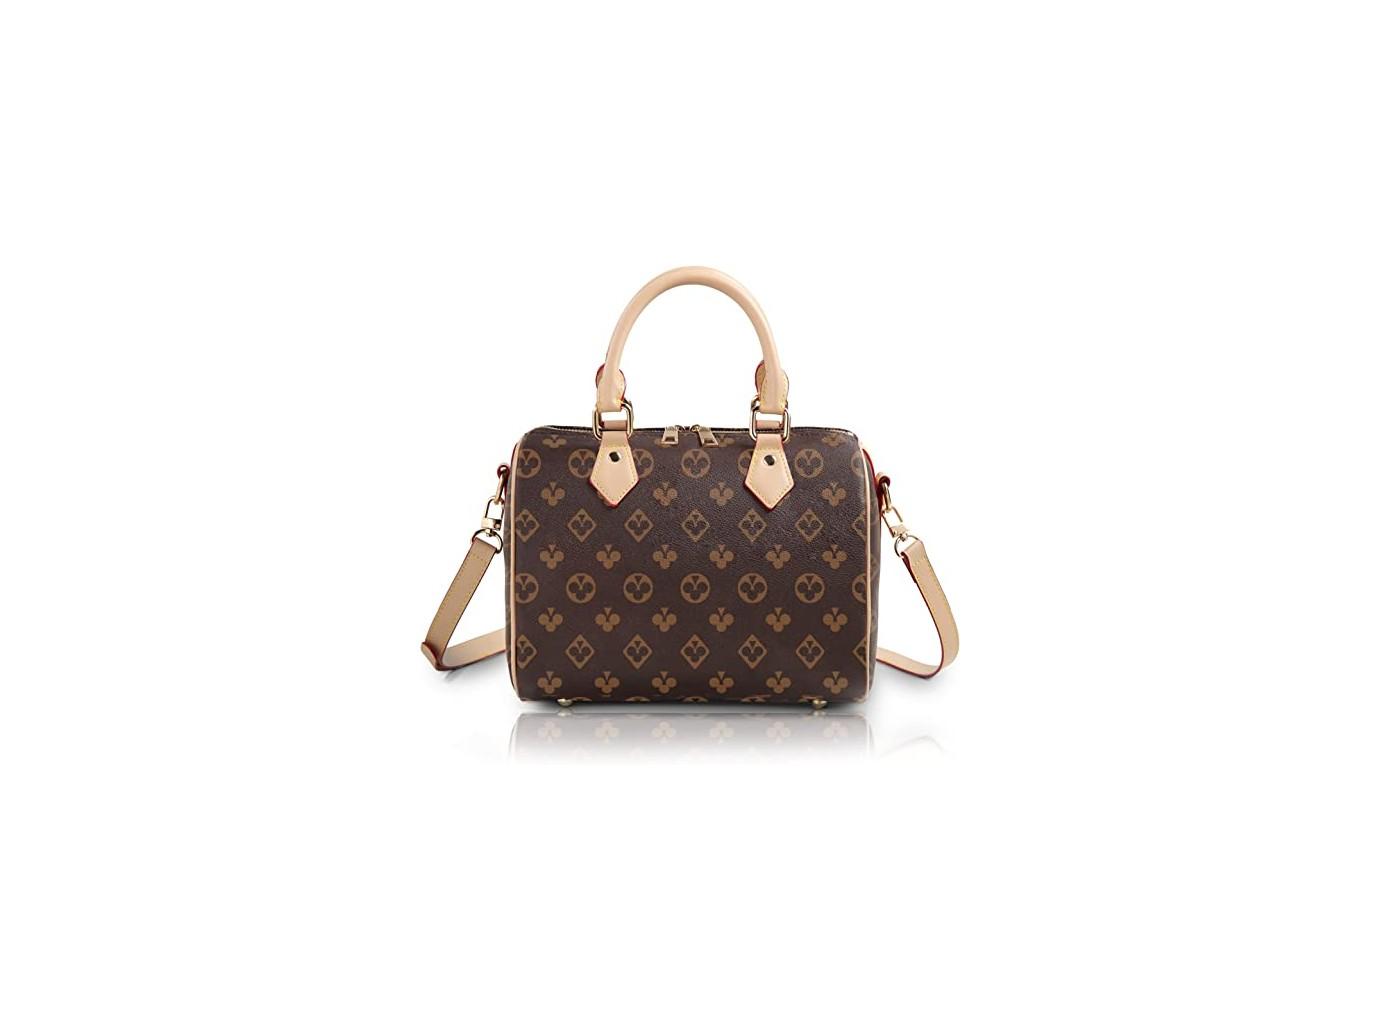 Boohoo's new £16 Louis Vuitton bag dupe saves shoppers £1.4k